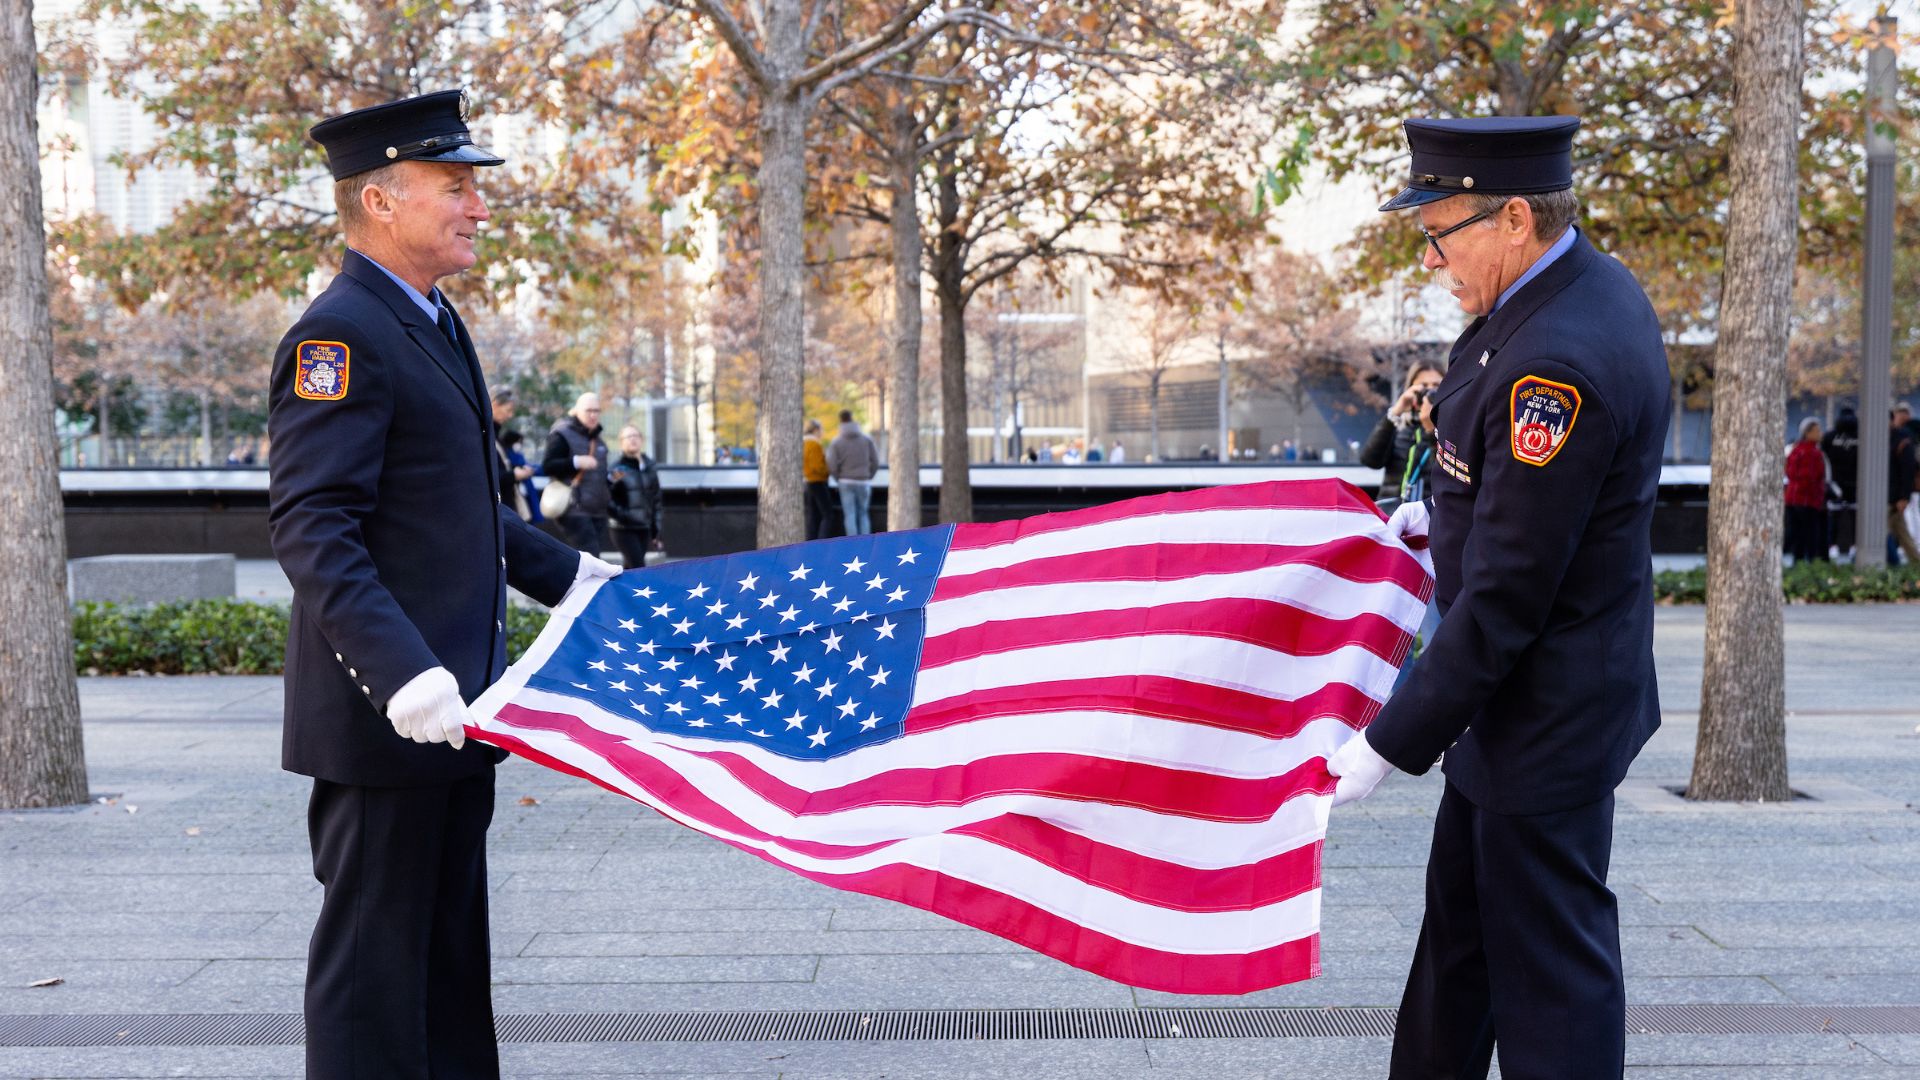 Uniformed officers folding an American flag on the Memorial plaza